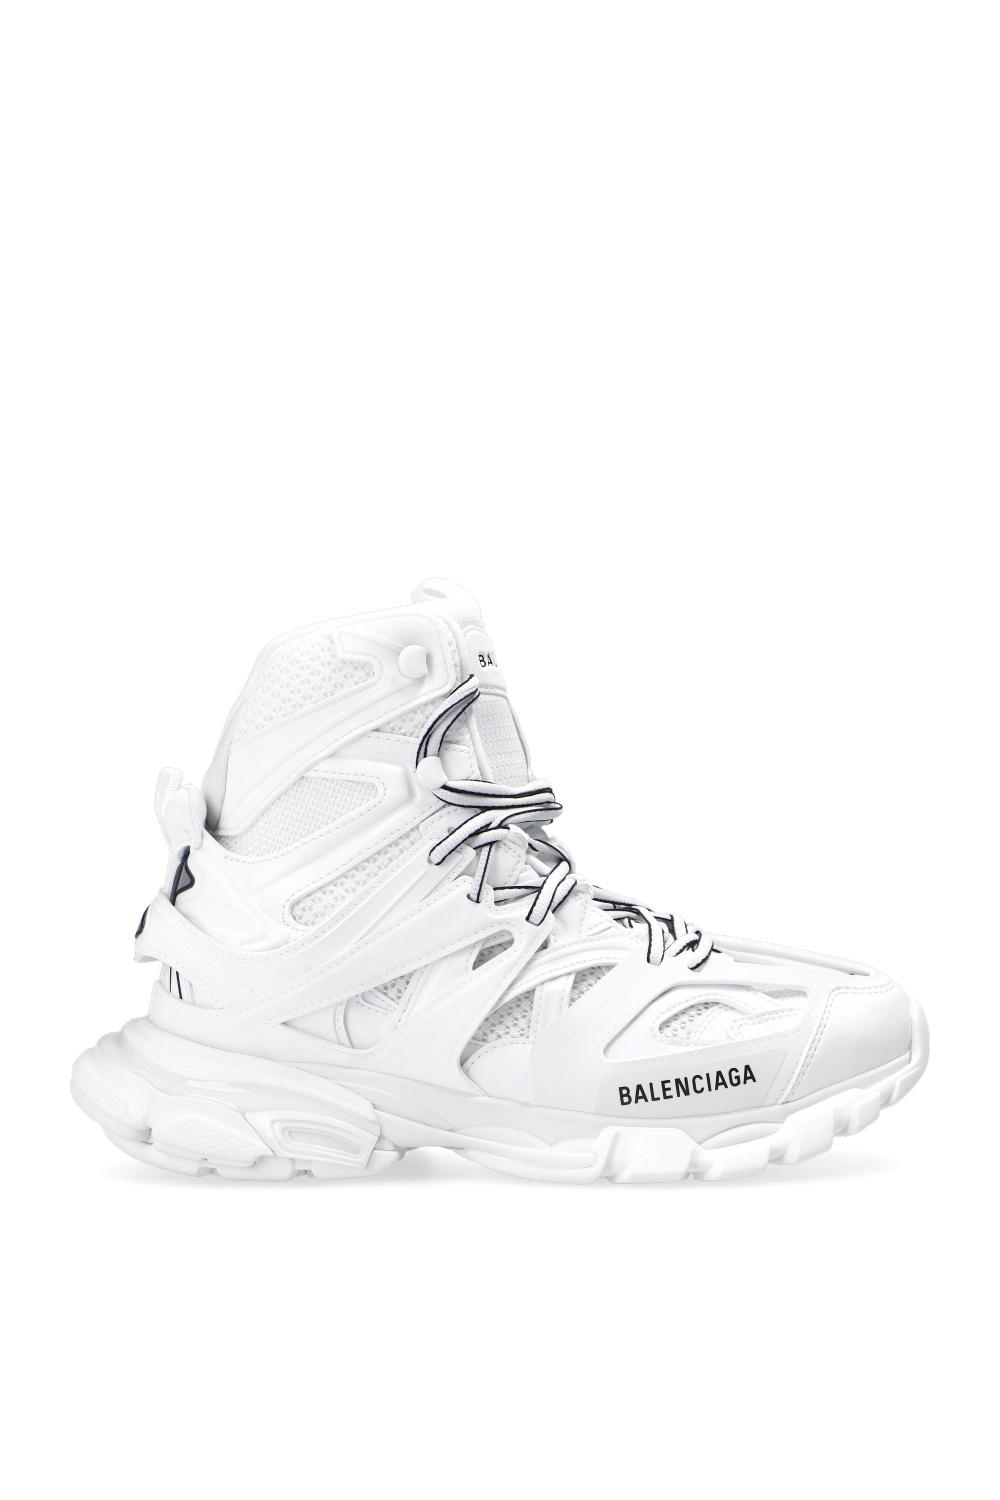 Balenciaga High-top Sneakers in White - Lyst